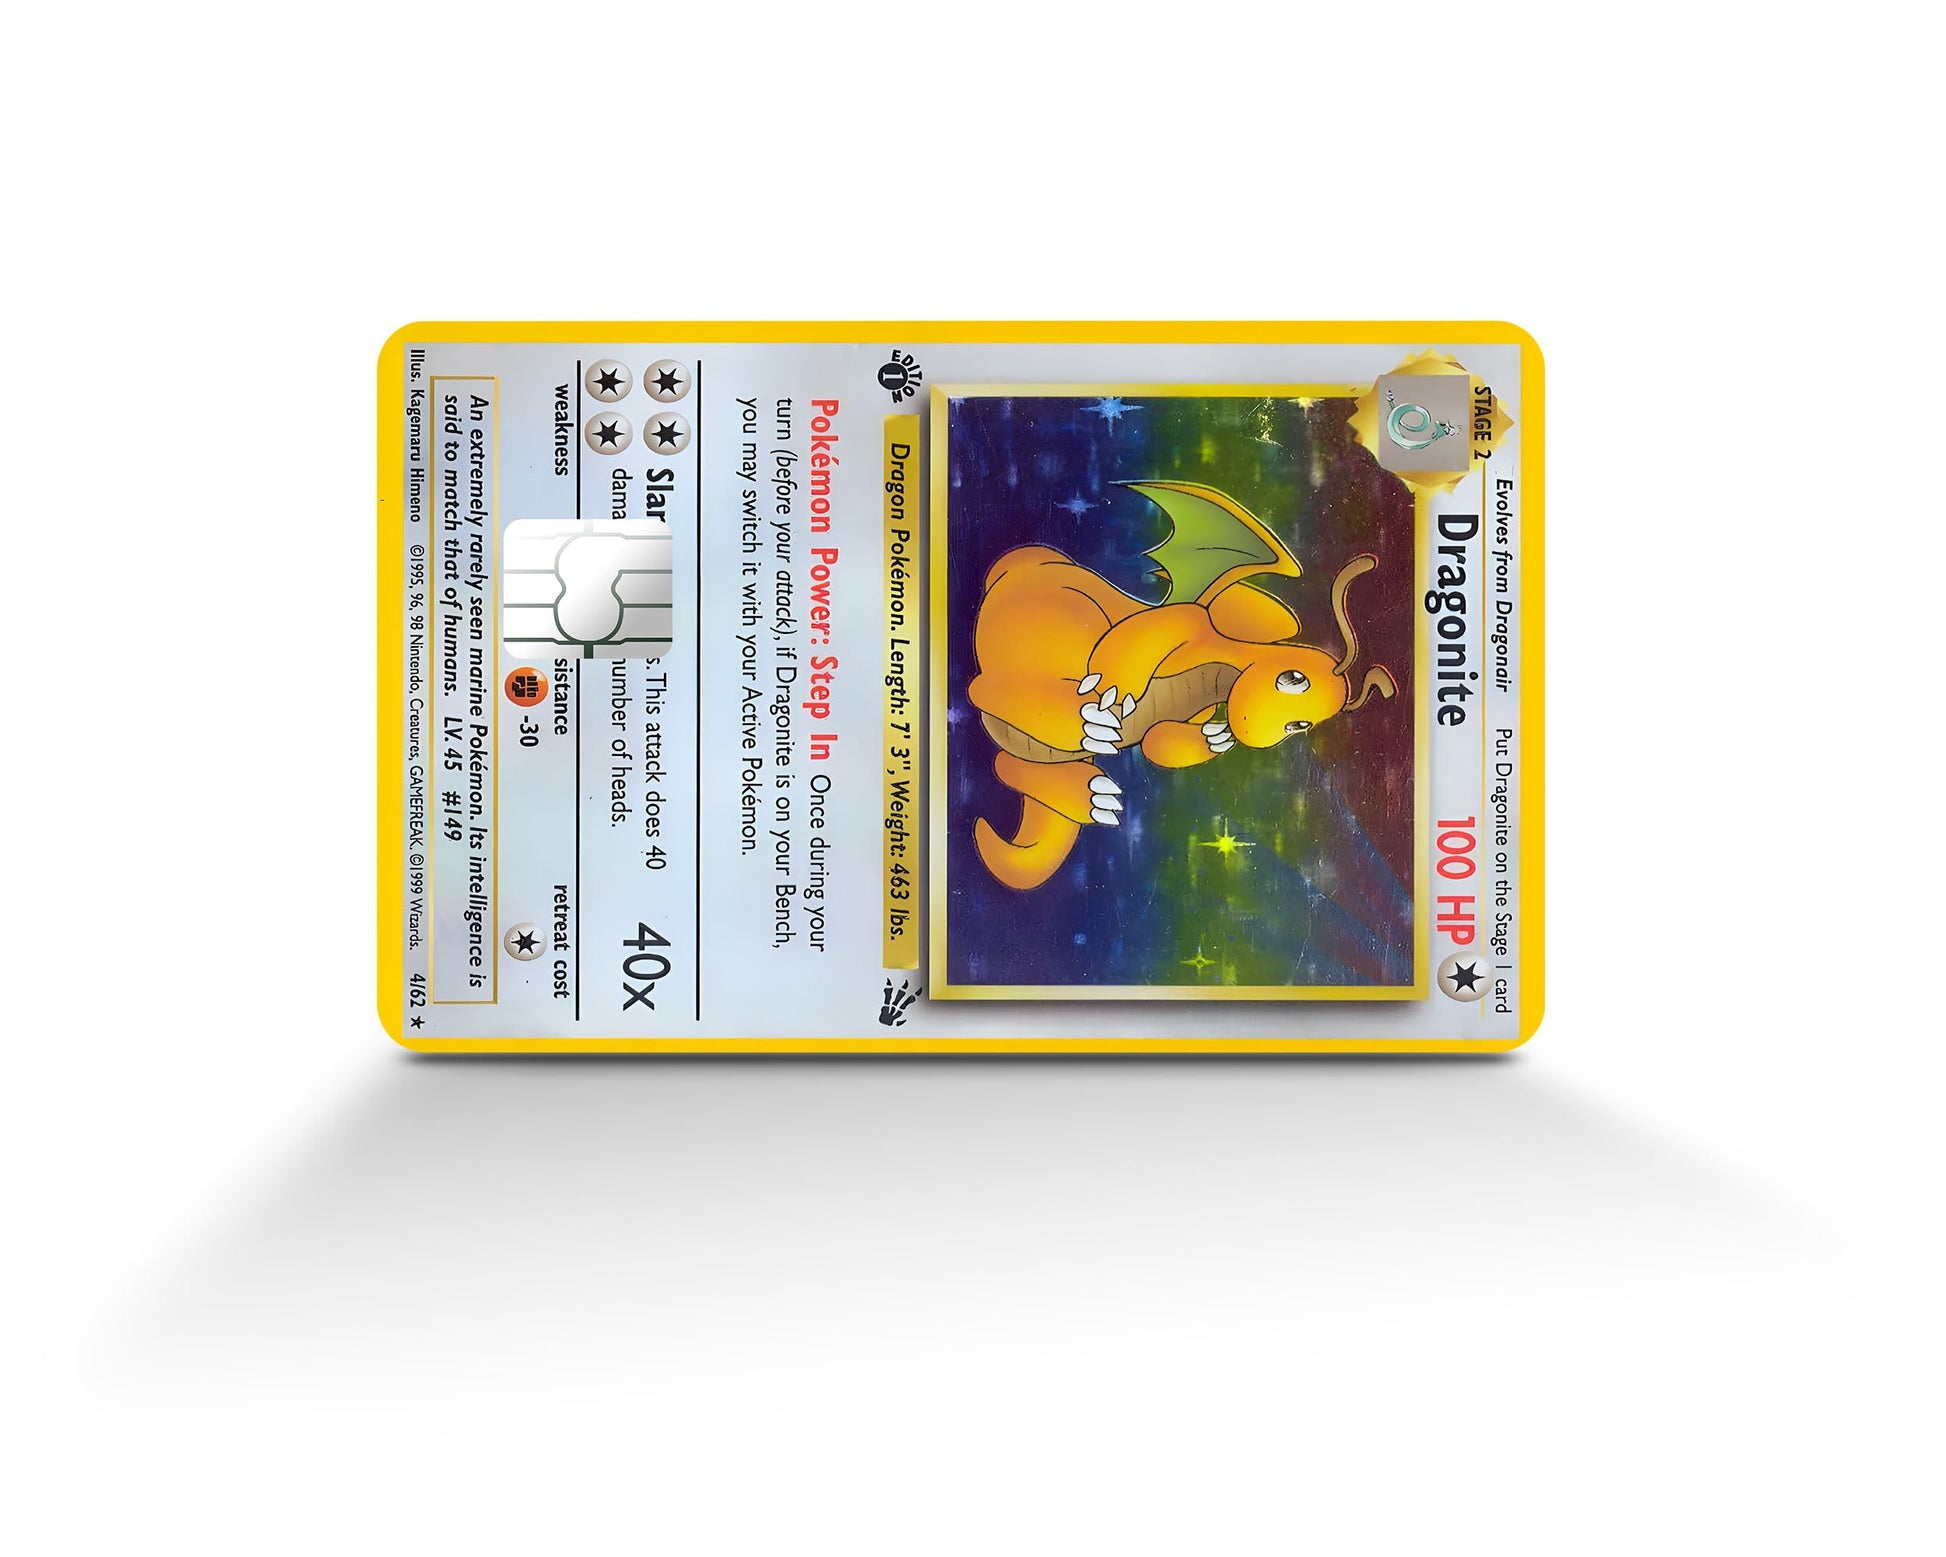 Anime Town Creations Credit Card Dragonite Pokemon Card Full Skins - Anime Pokemon Credit Card Skin